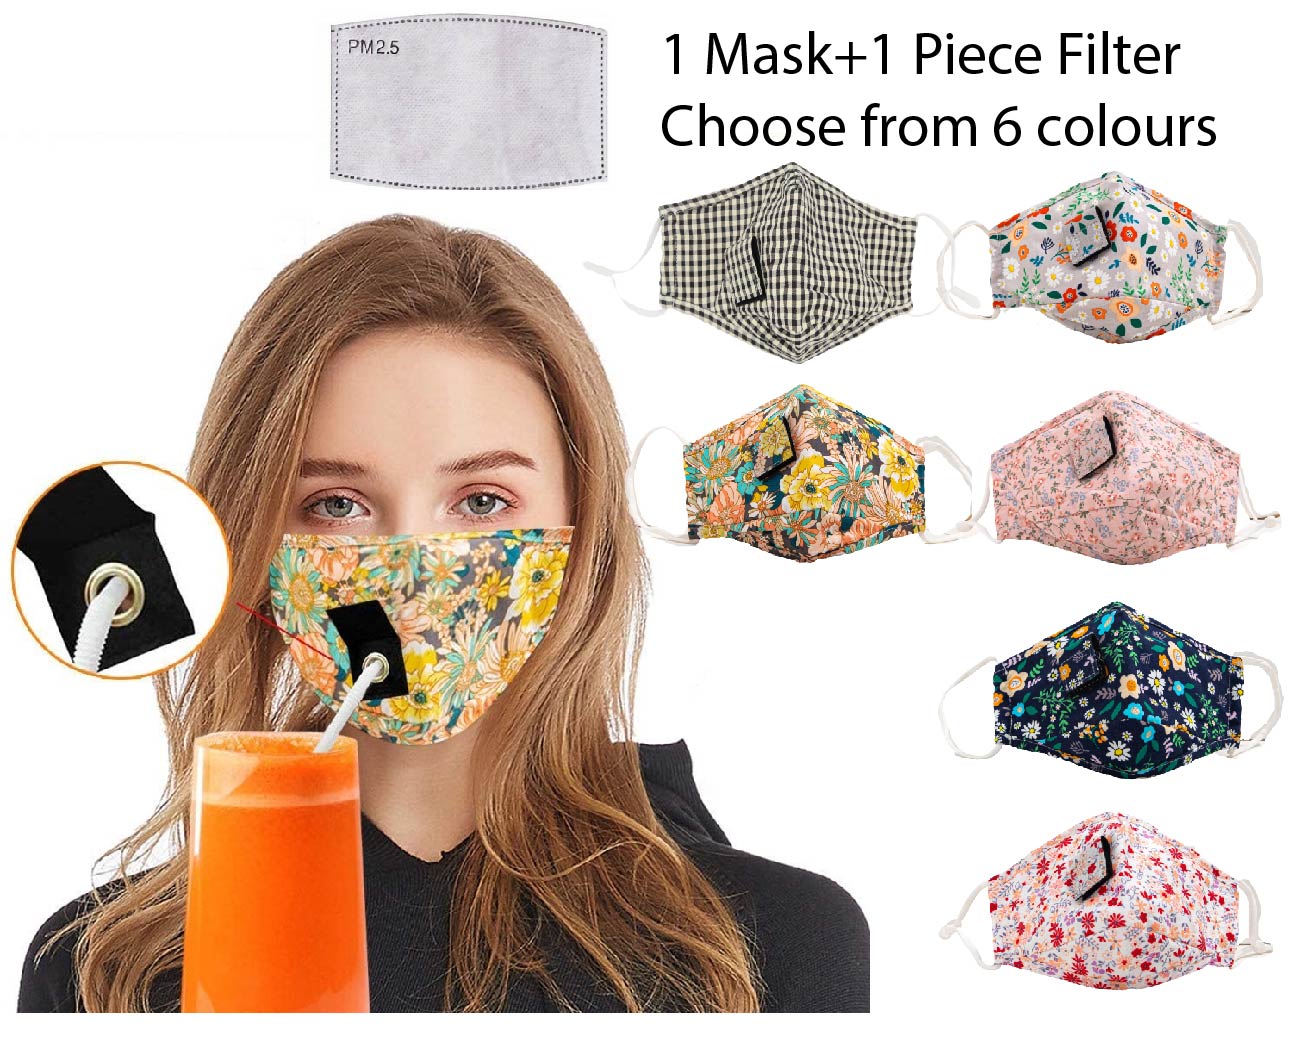 Cotton Face mask 1cm diameter opening for Straw face covering Choose fr 6 colours